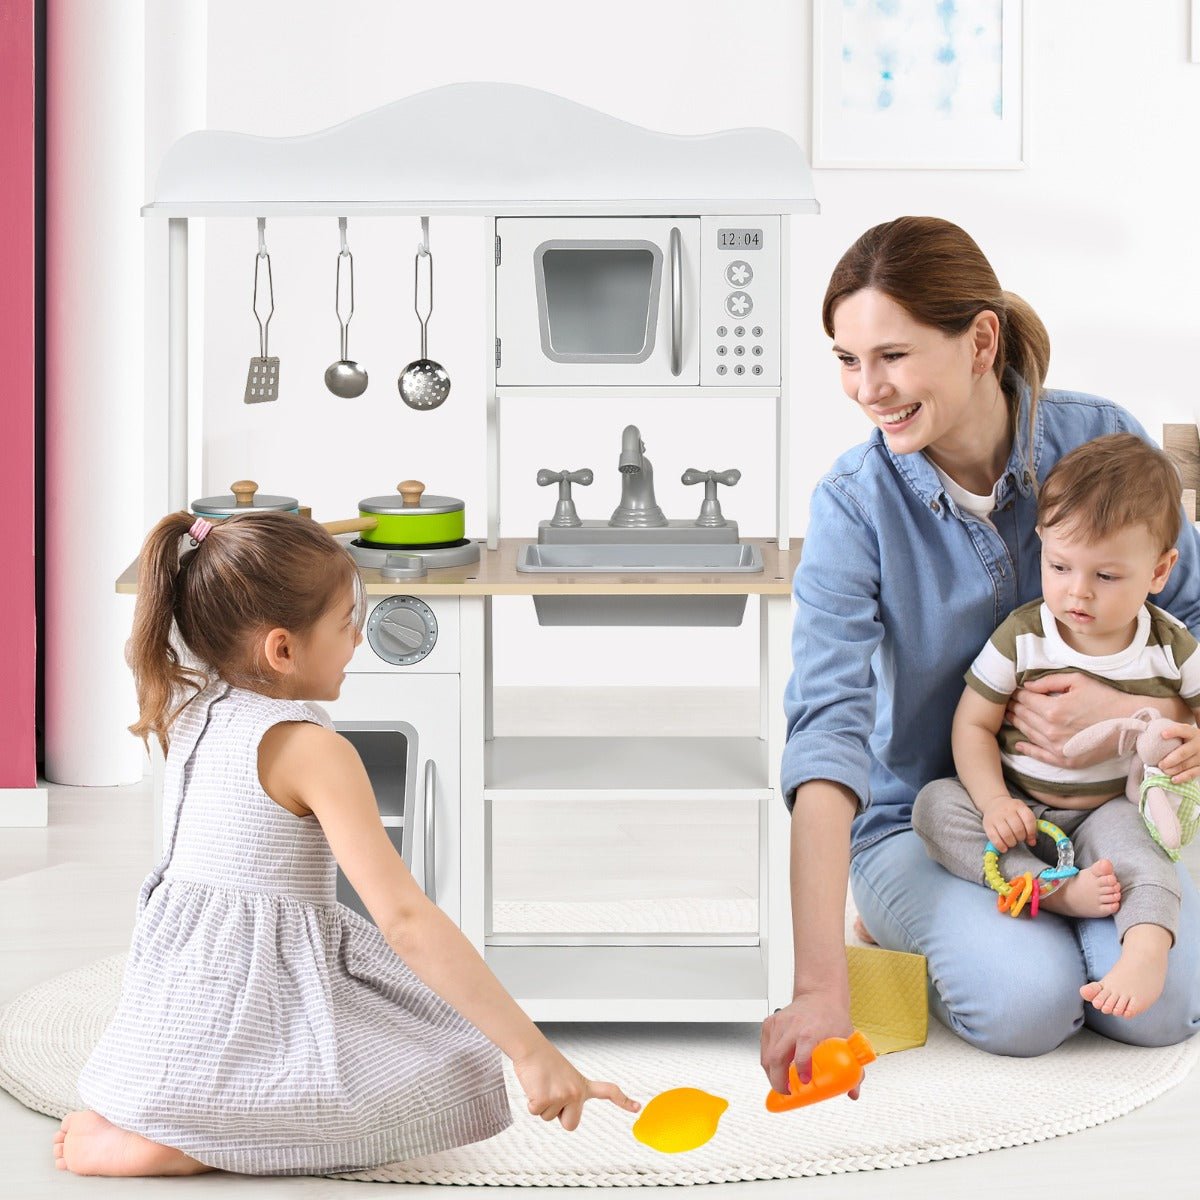 Empower Imaginations: Kids Play Kitchen with Educational Pretend Cooking Set